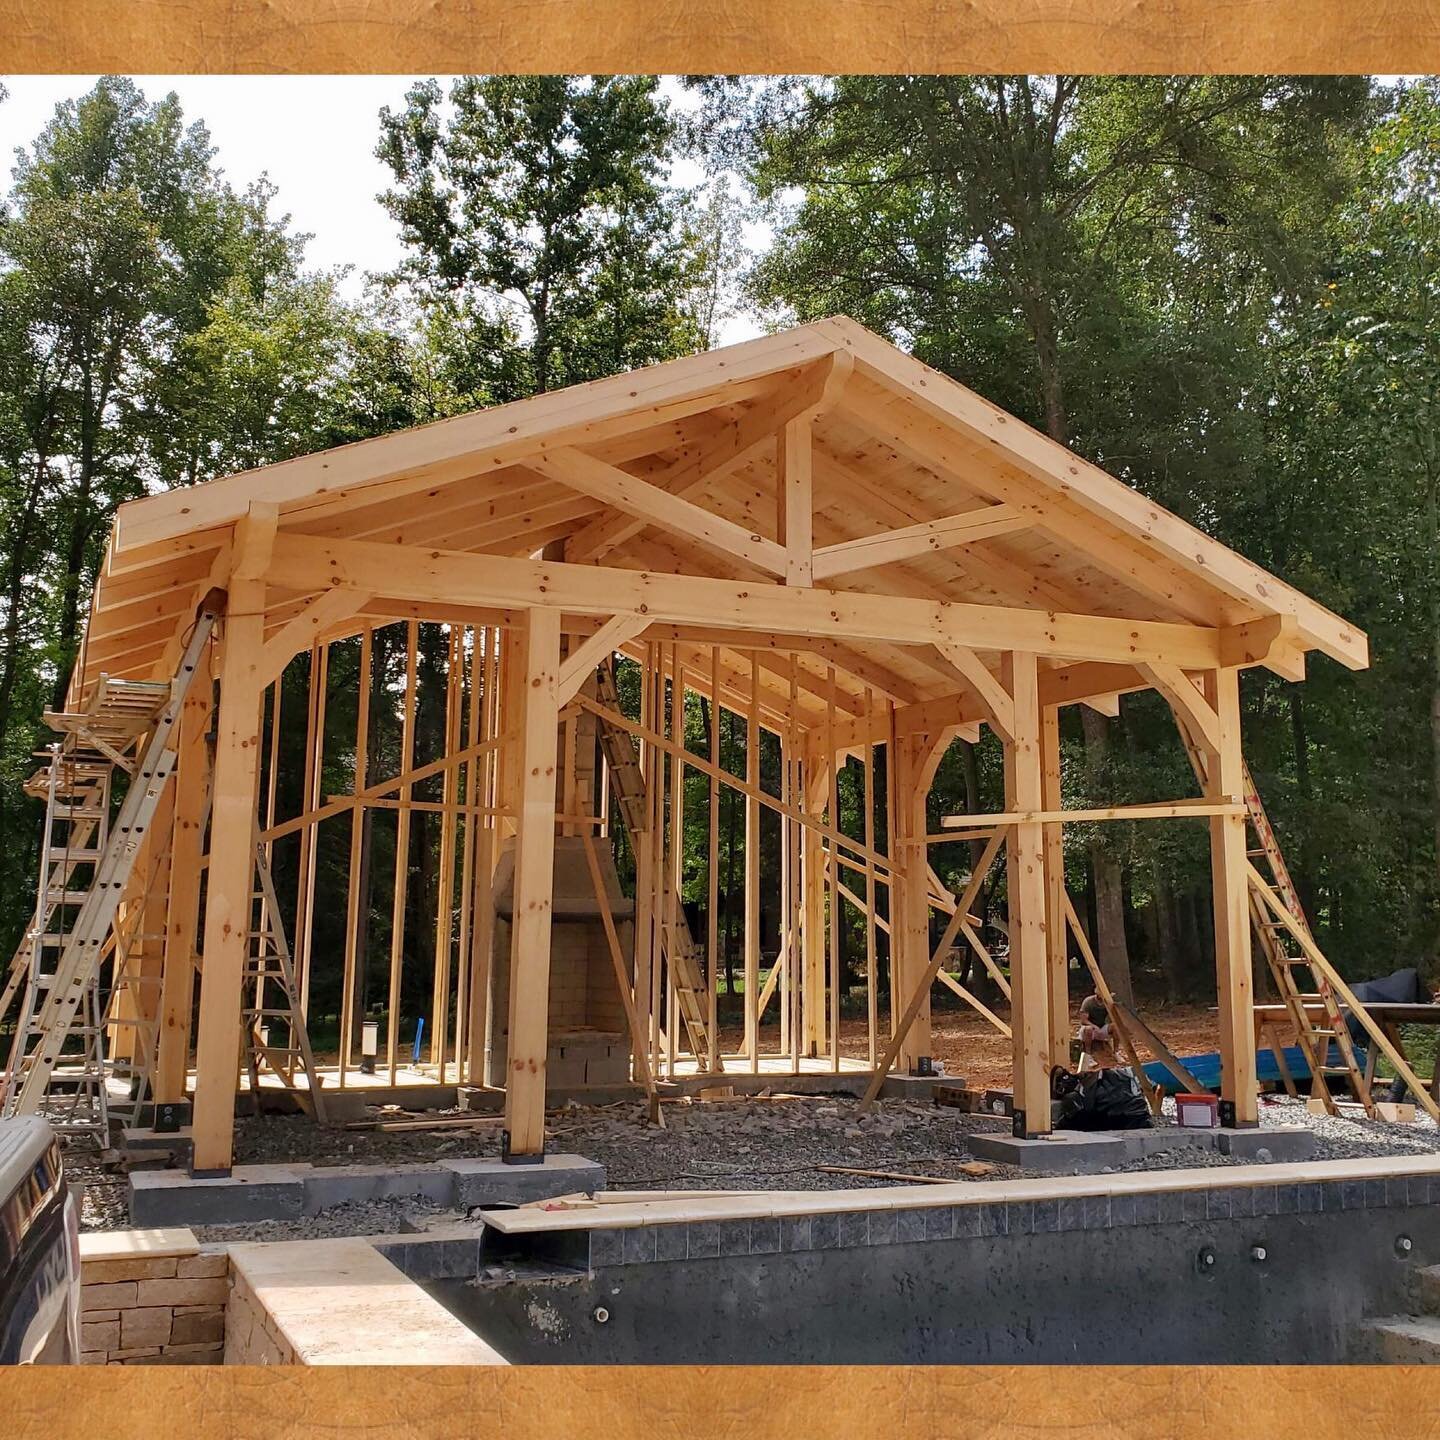 This beautiful timber frame pool house/pavilion is going up near Charlotte, NC. Once the design was completed and timbers were delivered, this structure was erected in 3 days. What an extraordinary feature for this homeowner&rsquo;s yard! 
&bull;
&bu